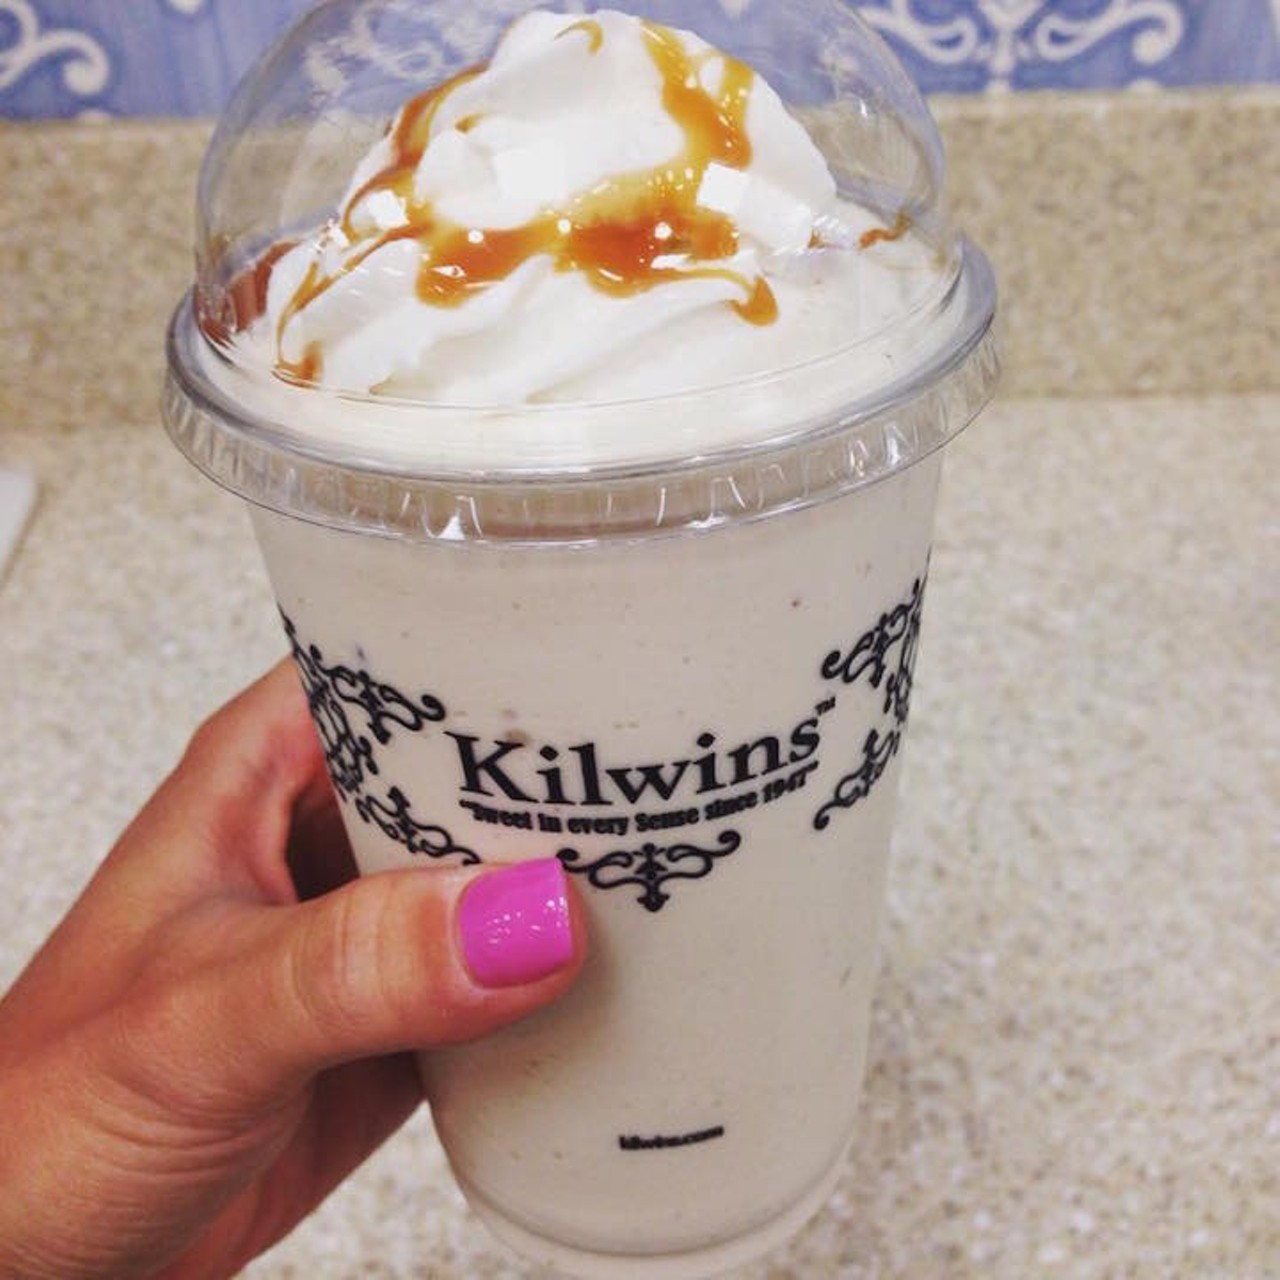 Kilwin&#146;s Winter Park
122 N. Park Ave.; 407-622-6292
Park Avenue is full of lil&#146; surprises, this one included. When the employees say the shakes taste exactly like the flavors they&#146;re advertised as, they sure ain&#146;t kidding. Now go order a batch of toasted coconut.
Photo via Kilwin's/Facebook